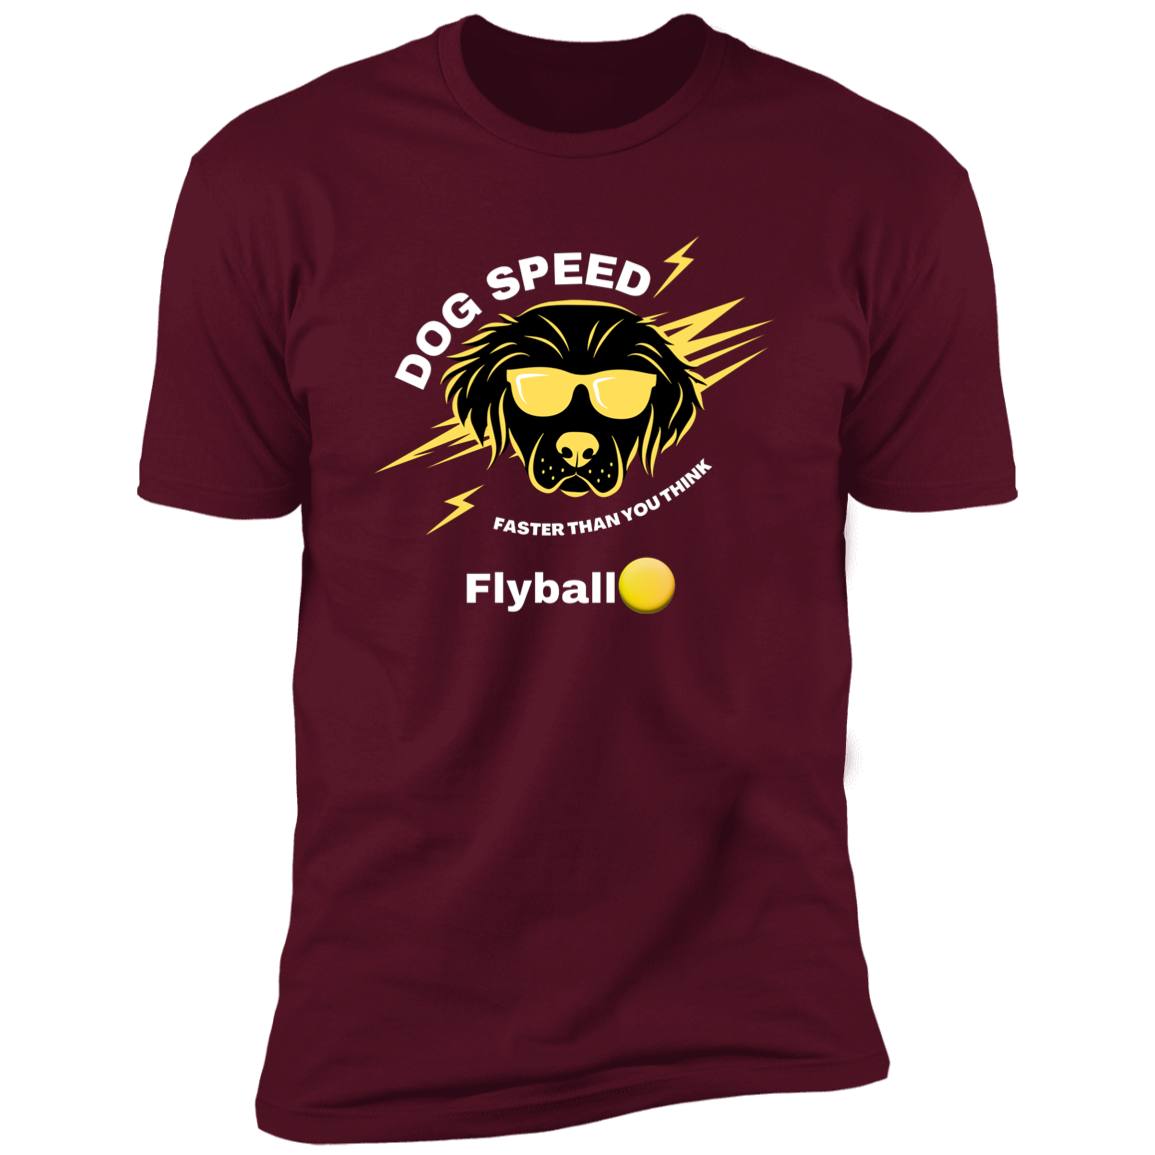 Dog Speed Faster Than You Think Flyball T-shirt, Flyball shirt dog shirt for humans, in maroon